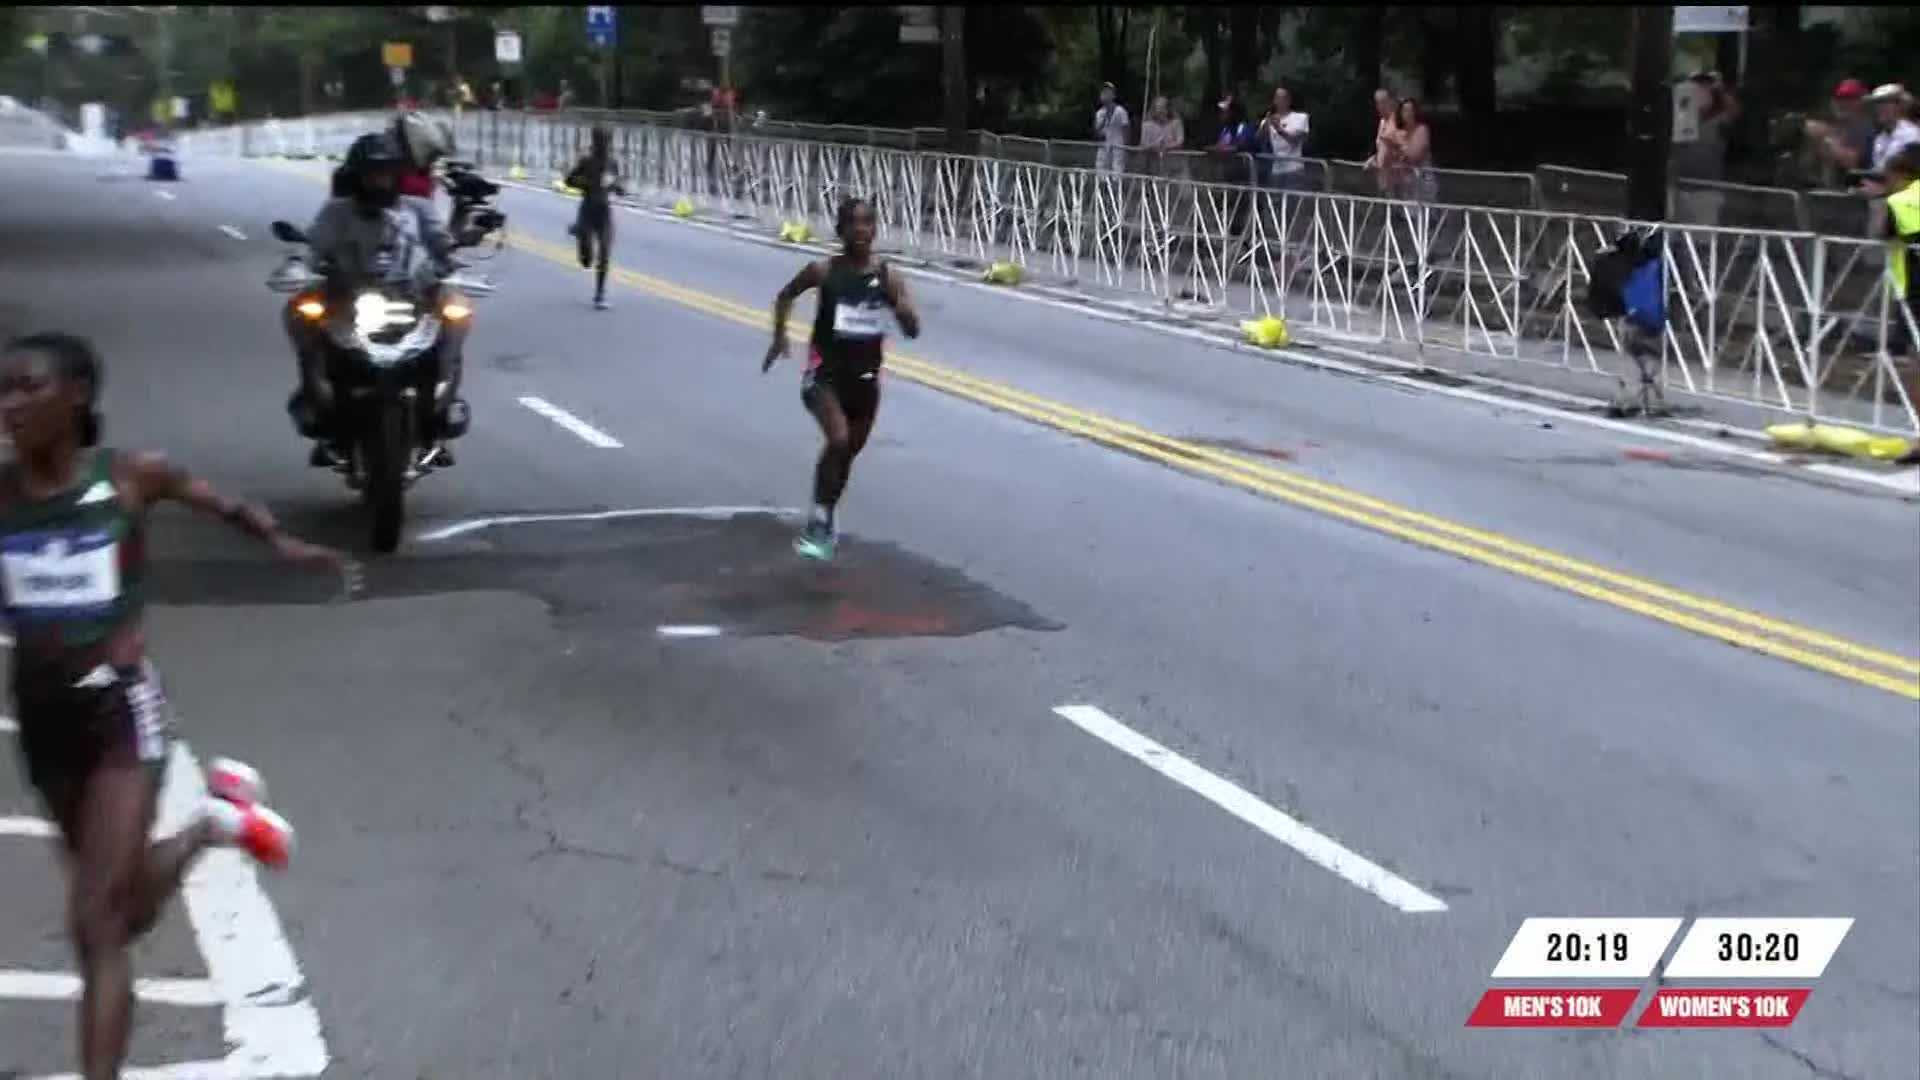 VIDEO: Elite runner in a 10K race took a wrong turn meters from the finish. It cost her thousands